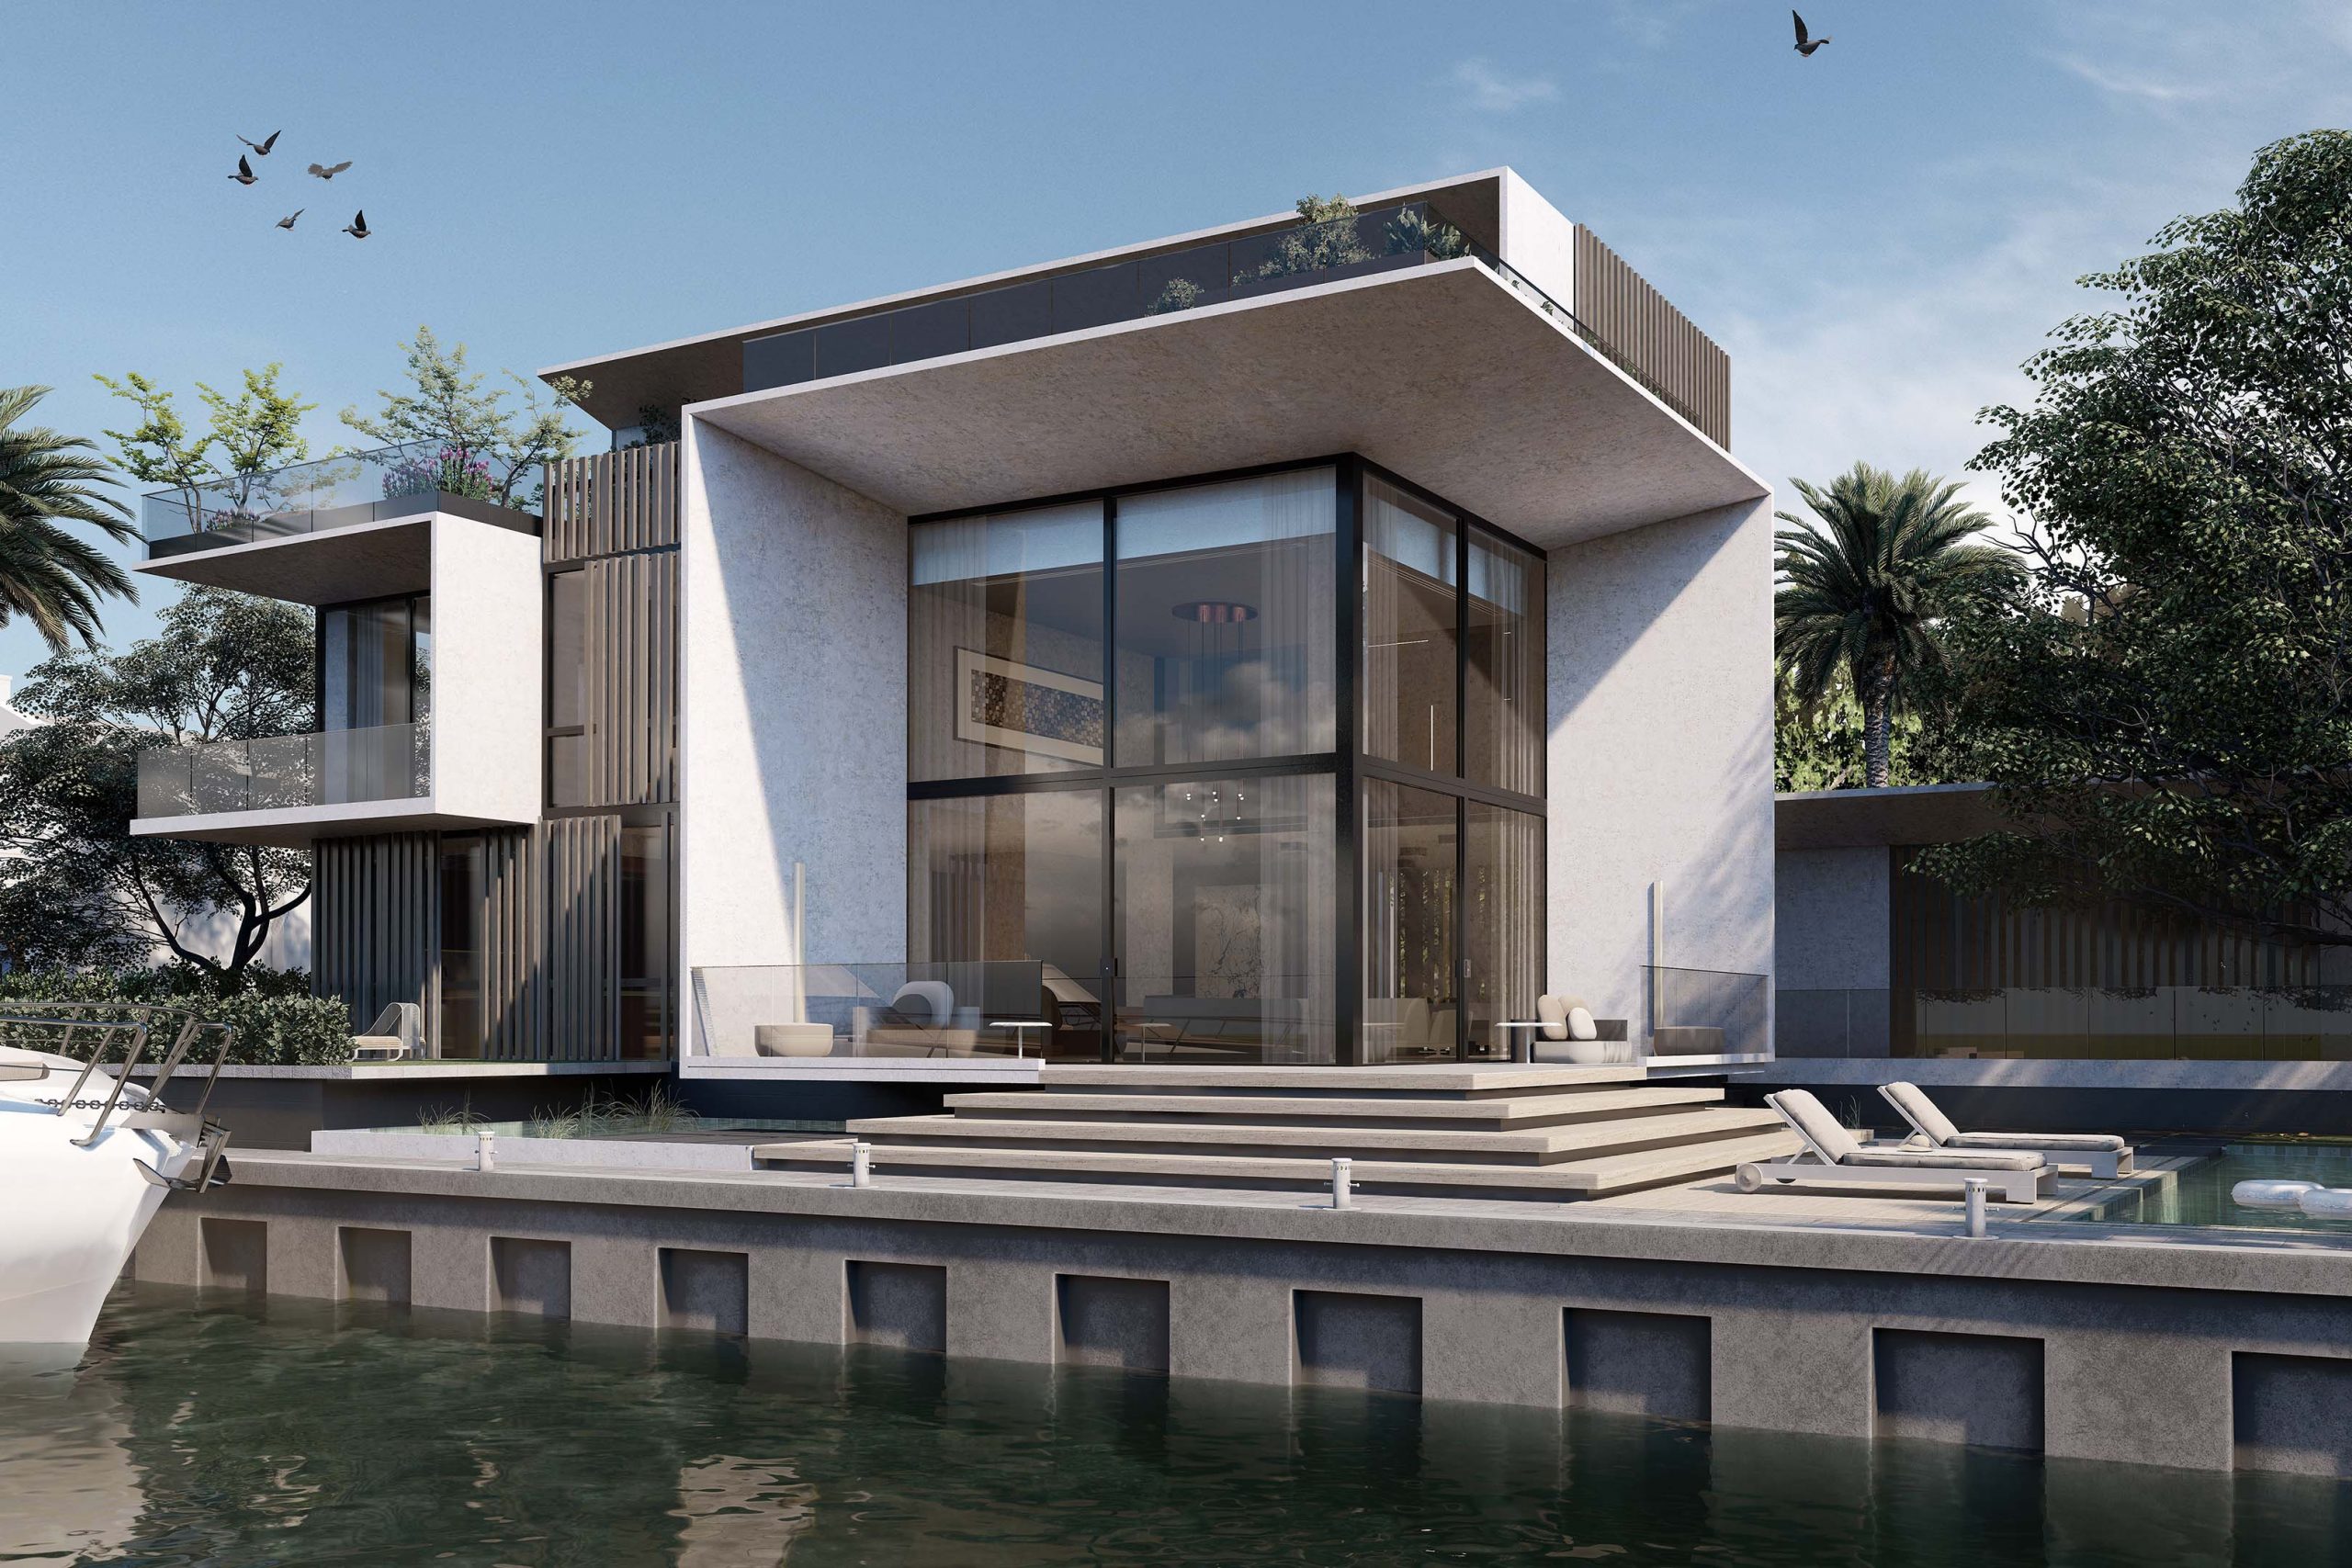 High-end Miami beach Villa facade in contemporary style, large windows, high double ceilings, boxes volumetric in different levels